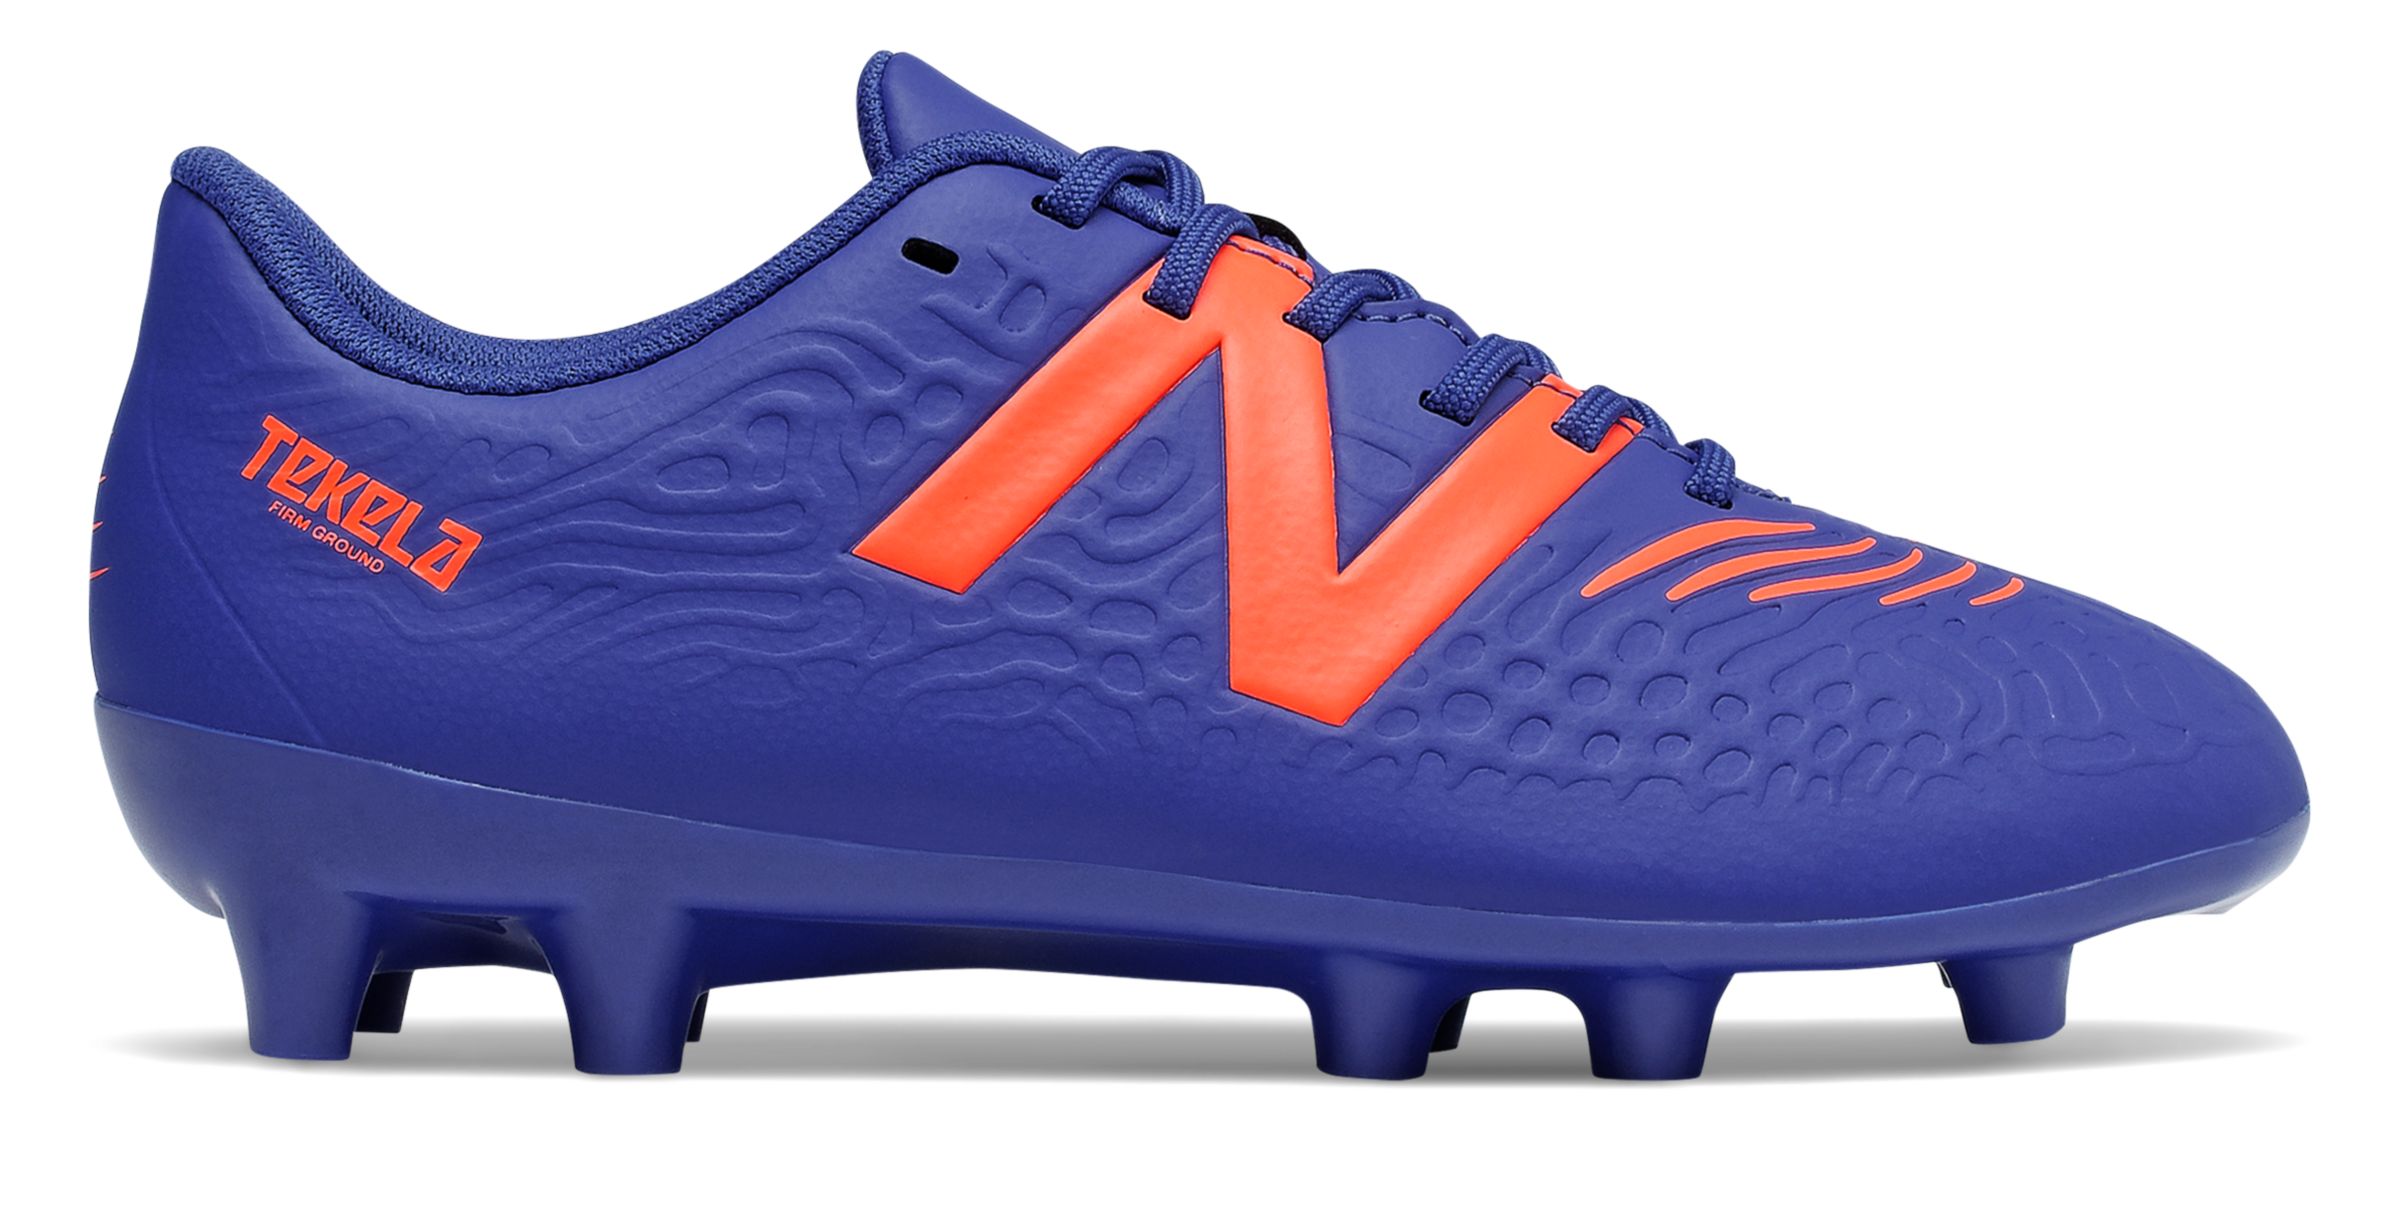 new balance wide youth soccer cleats